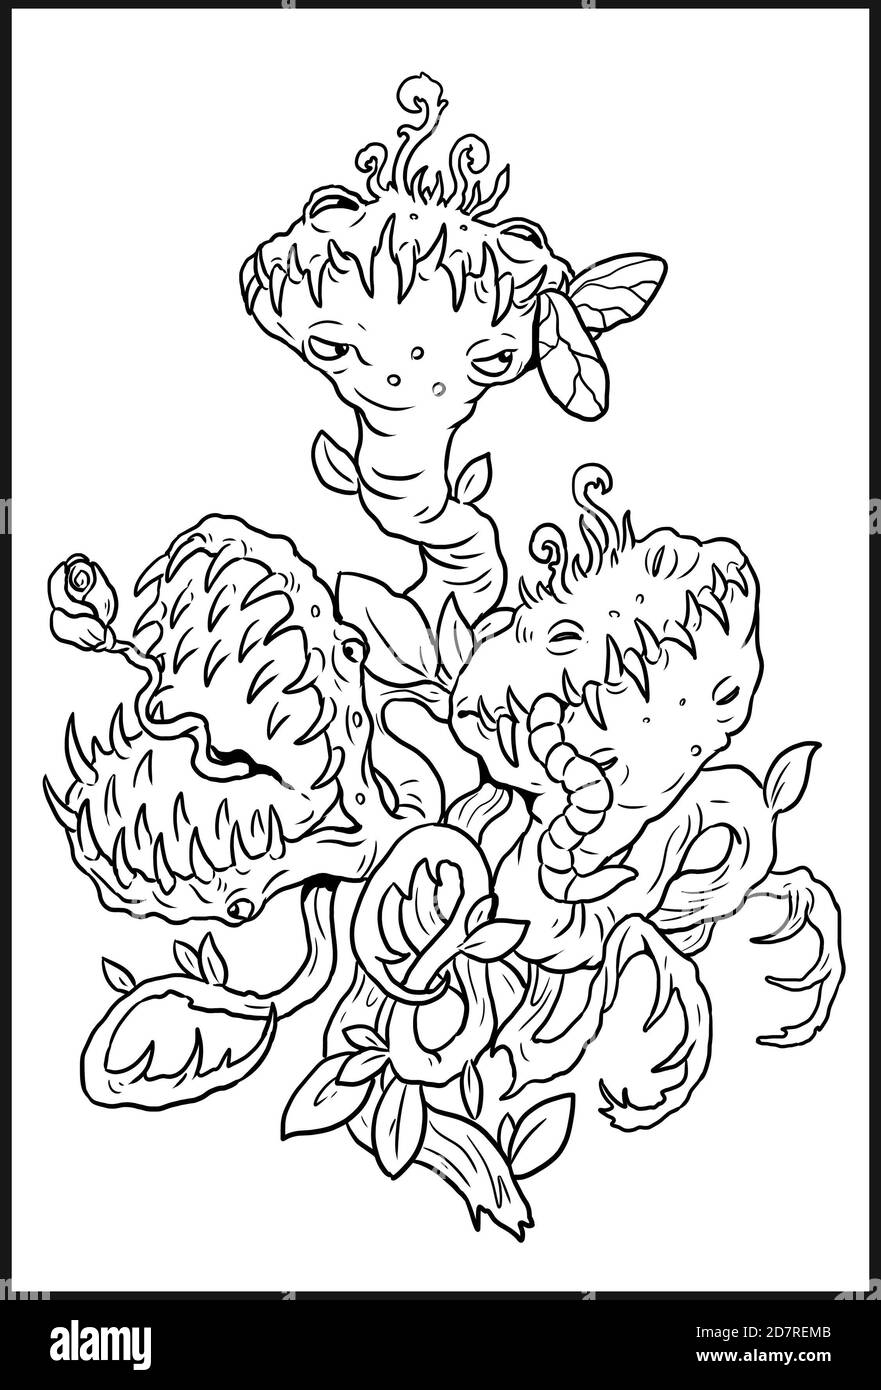 Funny carnivorous plant drawing. Halloween illustration. Coloring template. Stock Photo